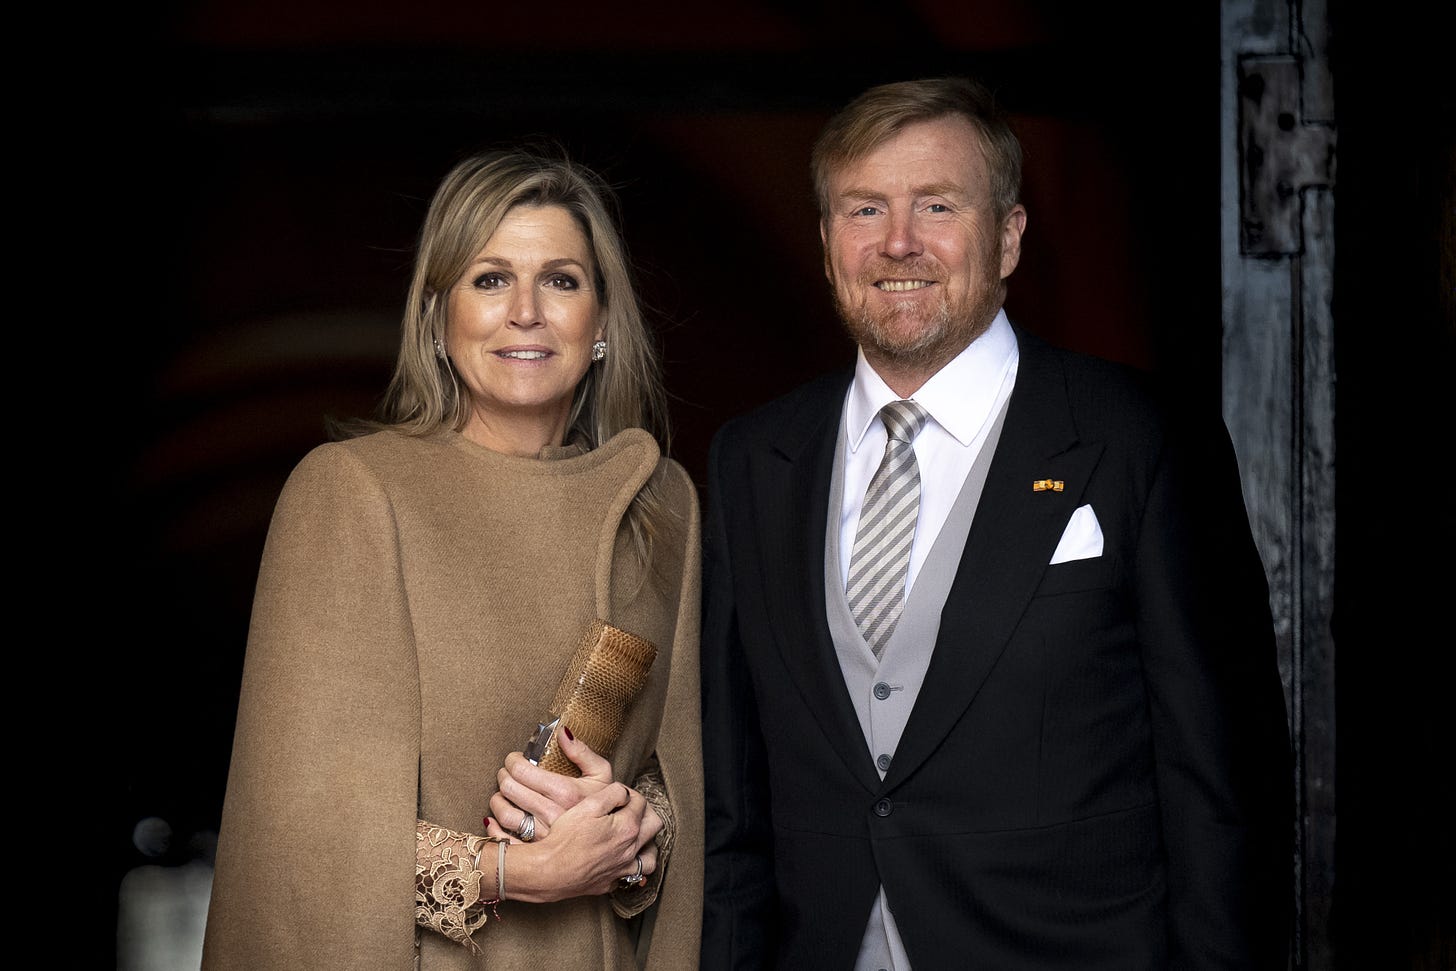 Smiling King Willem-Alexander and Queen Maxima